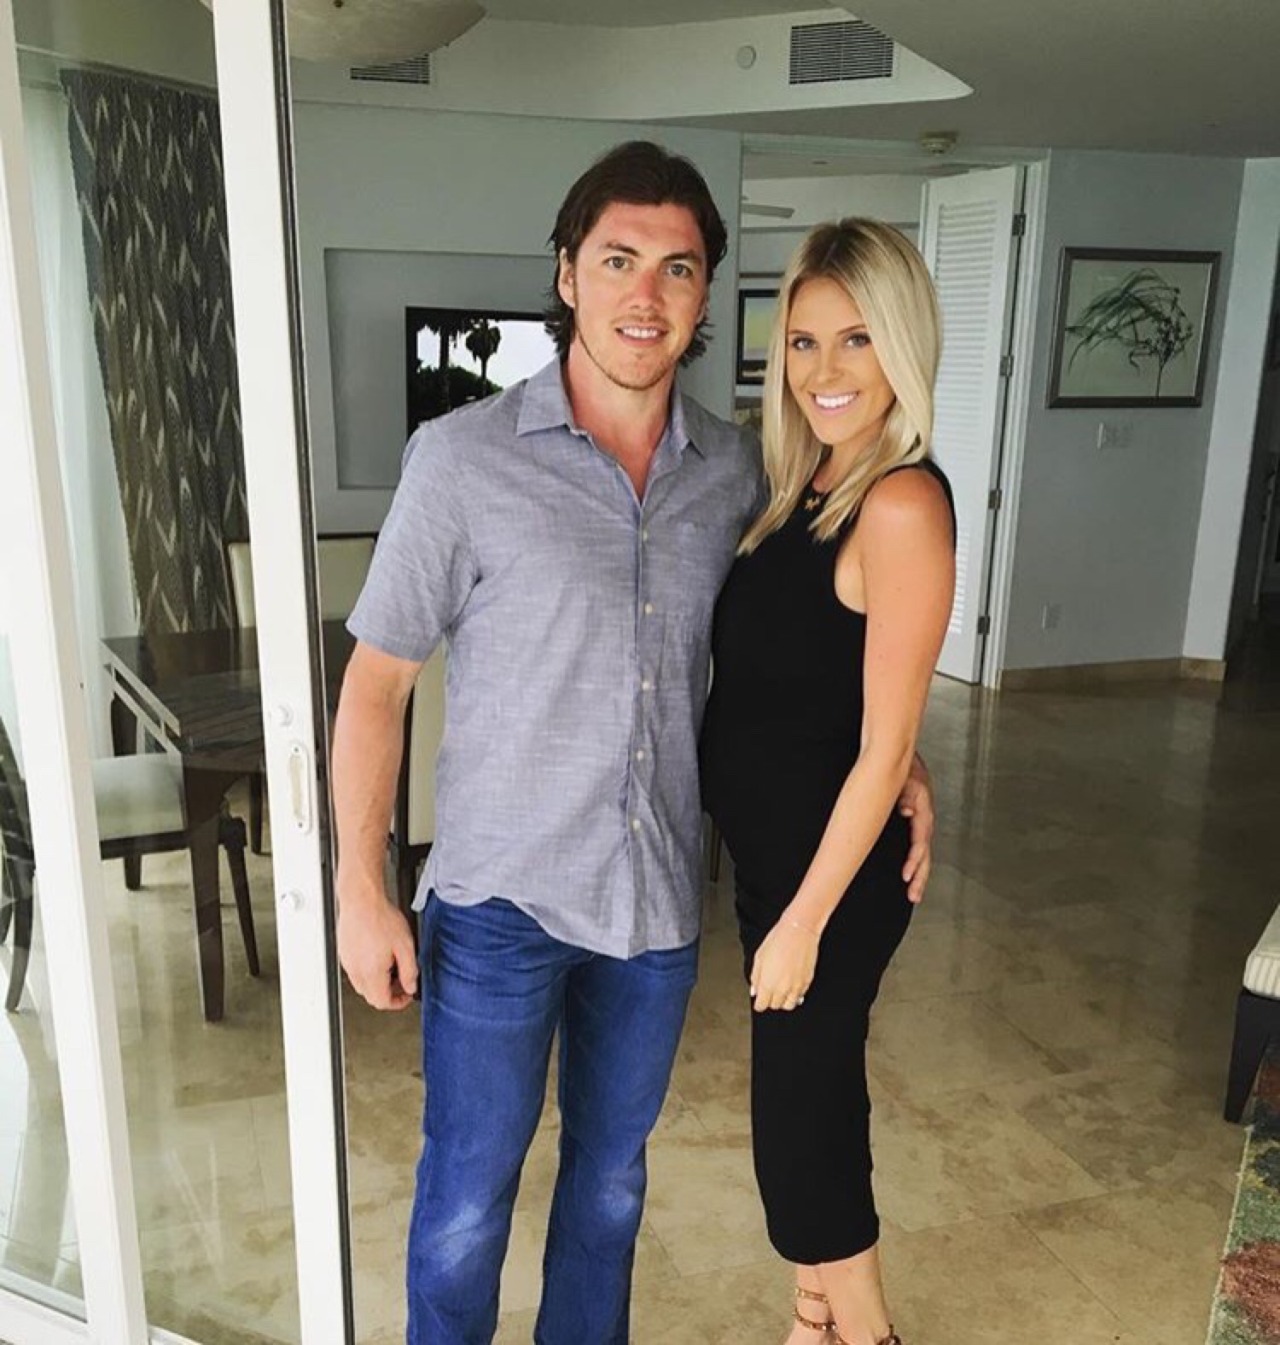 Wives and Girlfriends of NHL players — TJ & Lauren Oshie